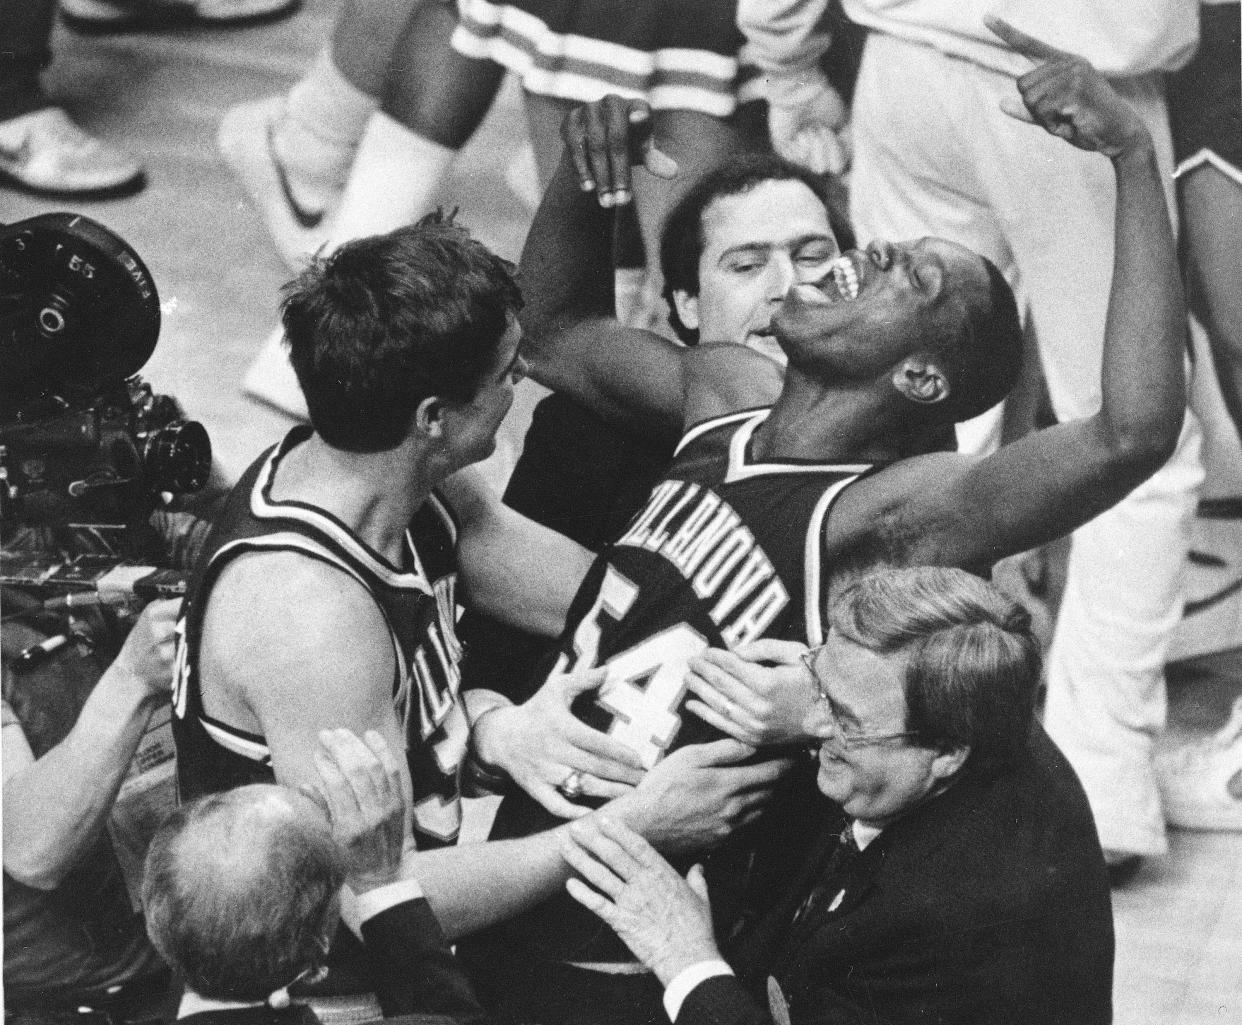 Villanova's Ed Pinckney celebrates with teammates after the Wildcats scored one of the greatest upsets in NCAA tournament history, toppling Georgetown and Patrick Ewing in the 1986 final. (AP Photo/Gary Landers, File)